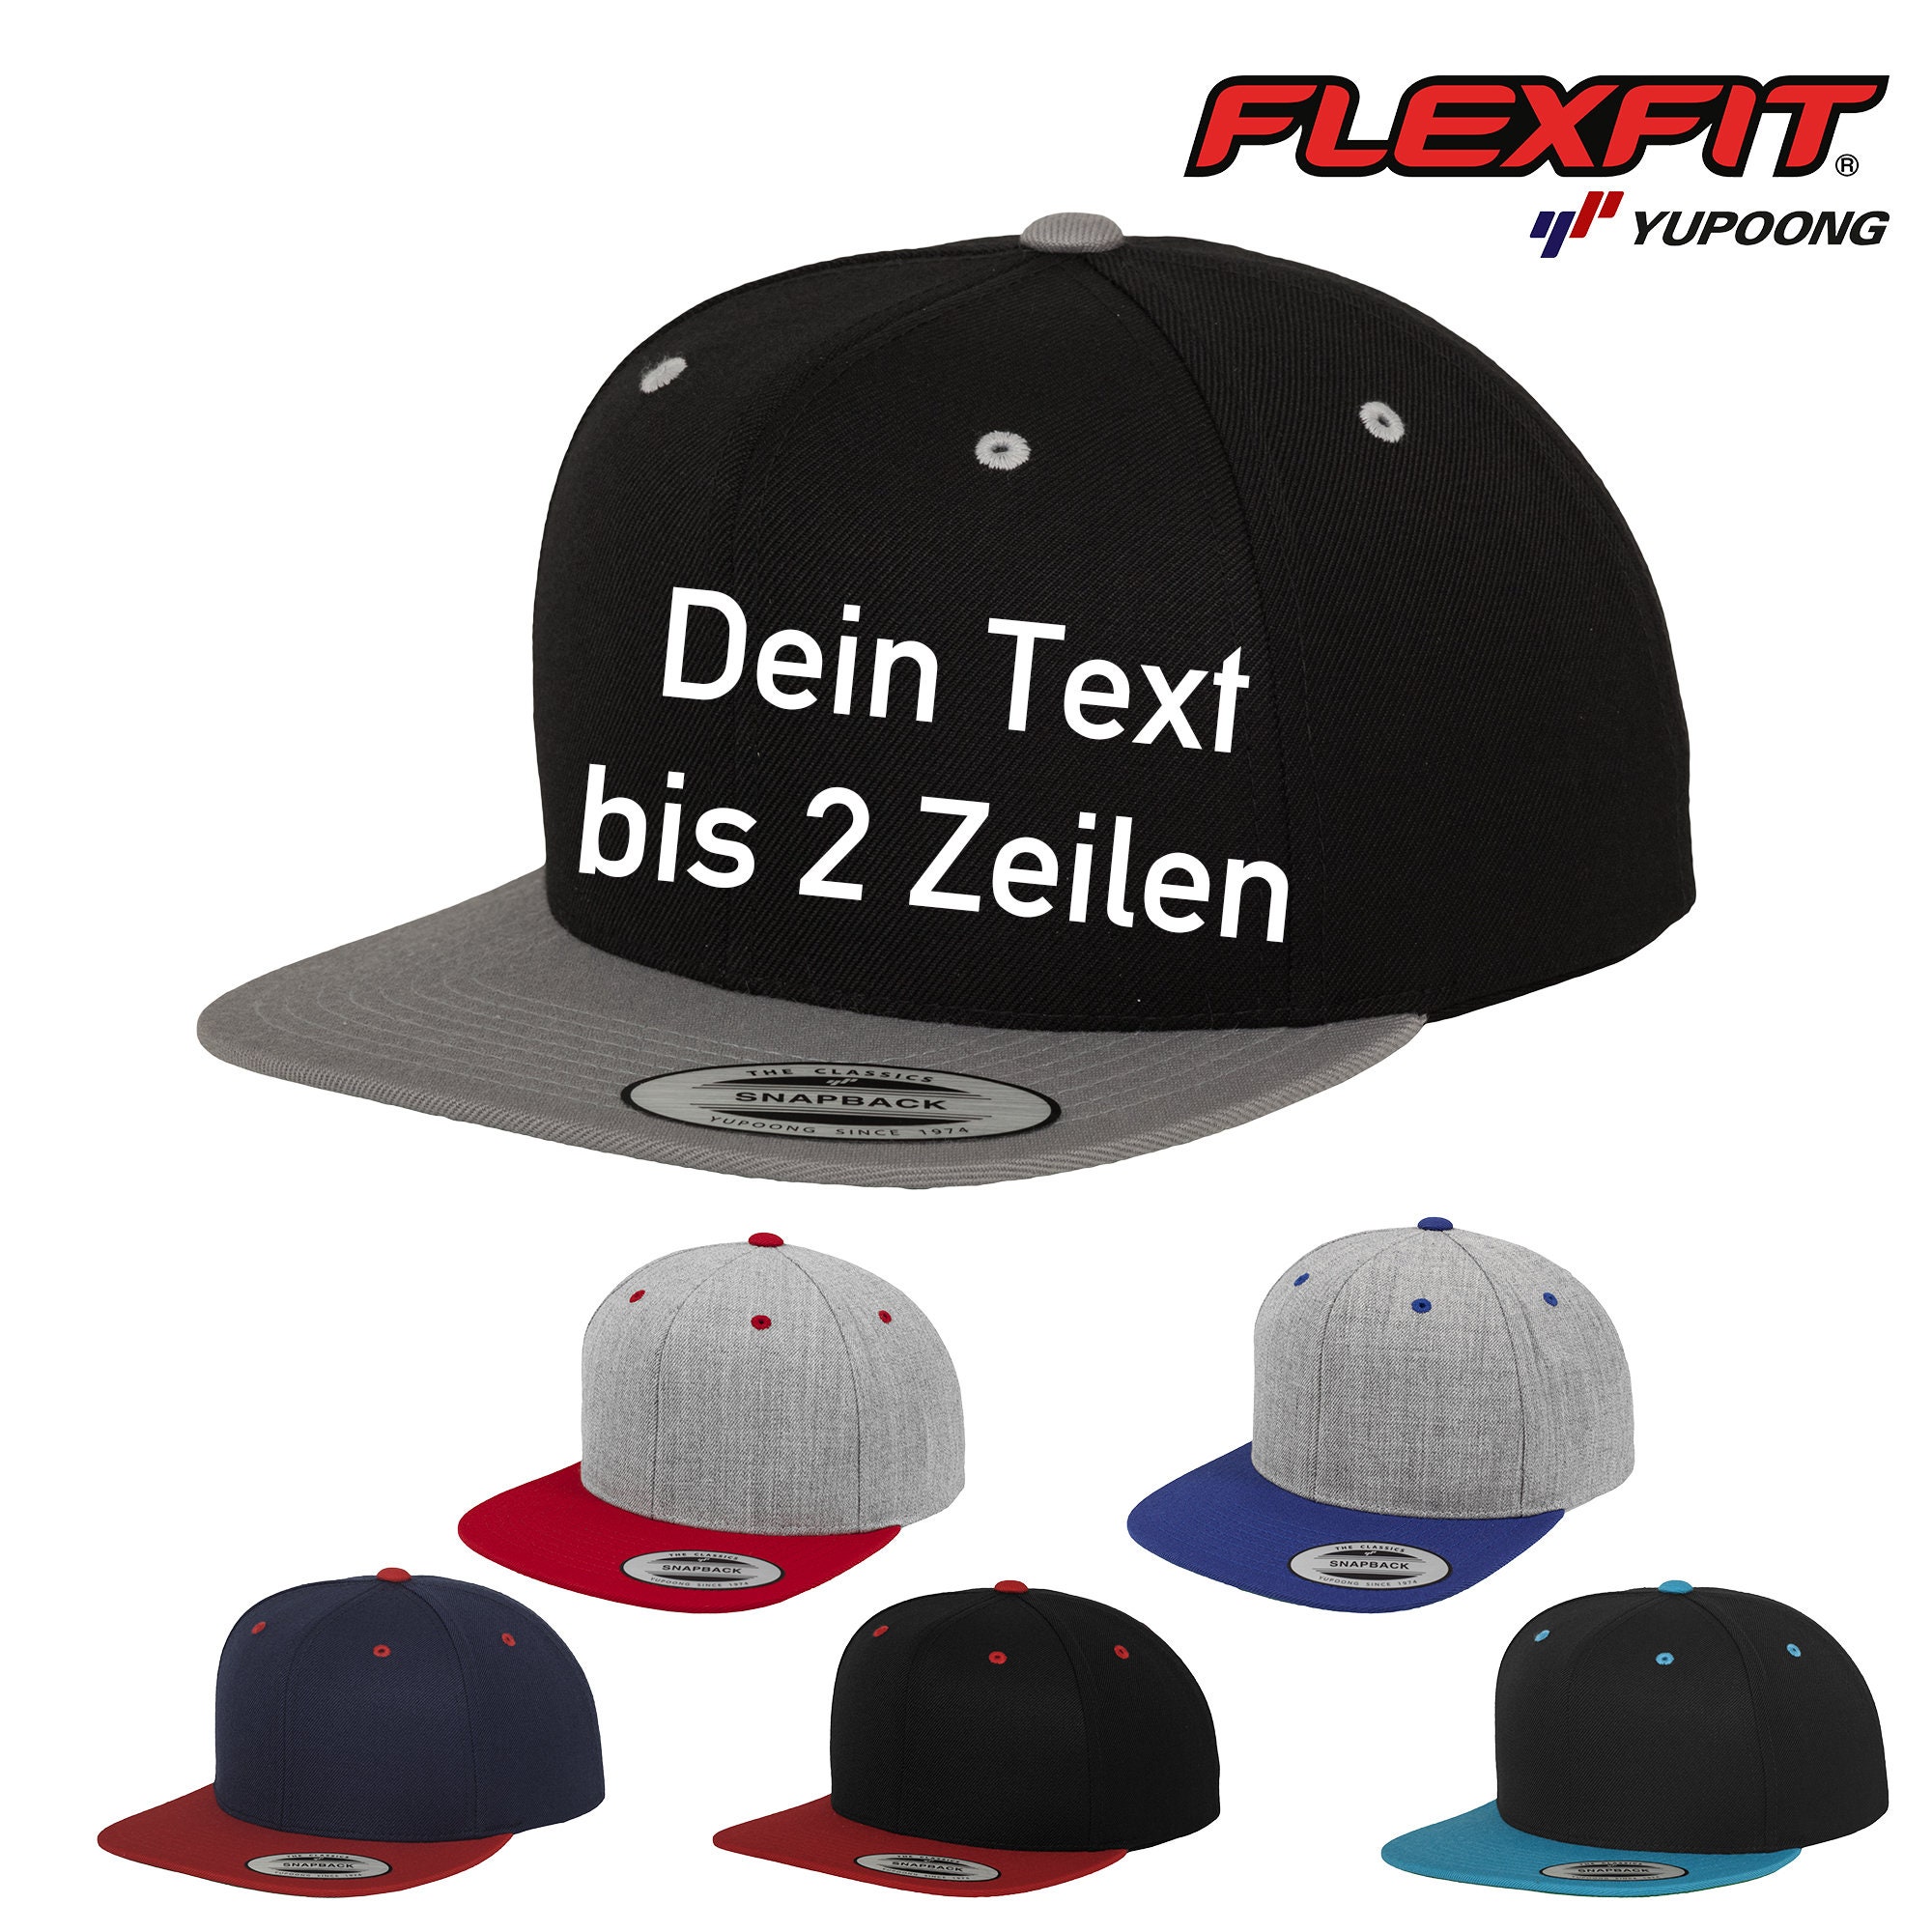 Gift With Desired Individually 2-tone Personalized, Embroidered Etsy Text, Cap - Baseball Flexfit Snapback,